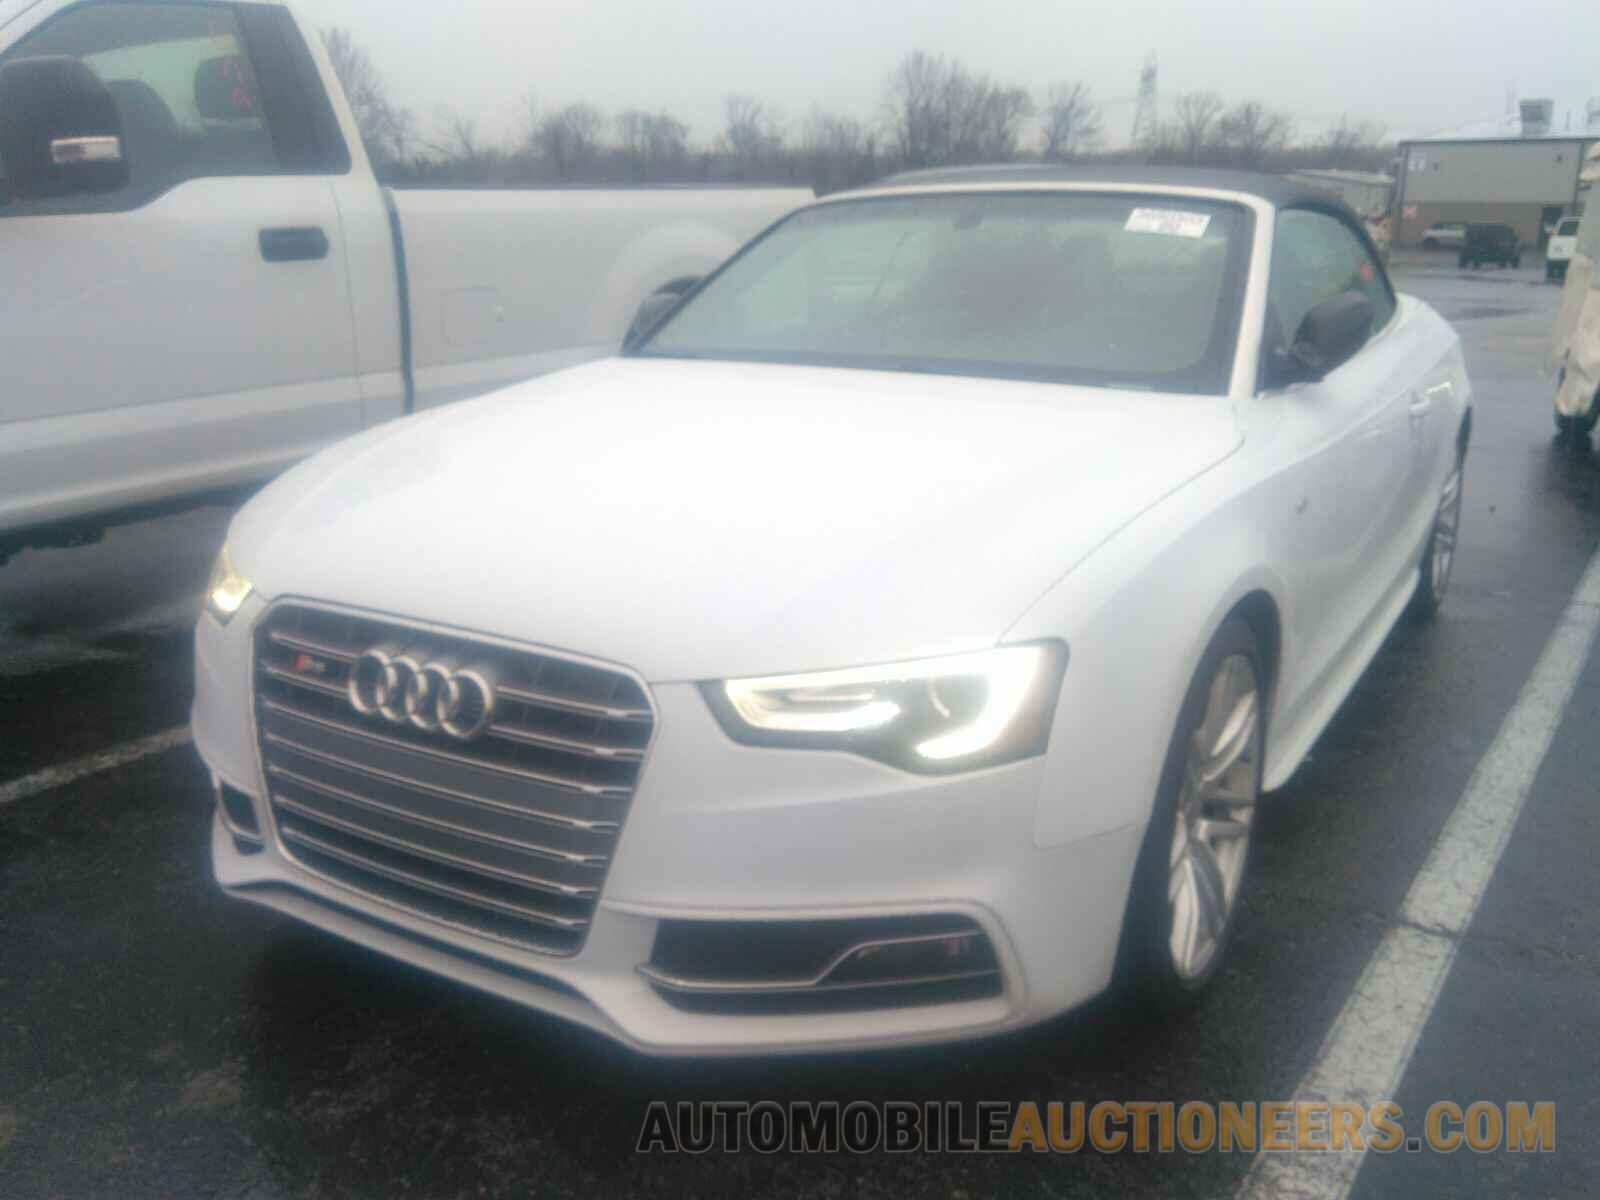 WAUCGAFH1FN006426 Audi S5 Cabriolet 2015